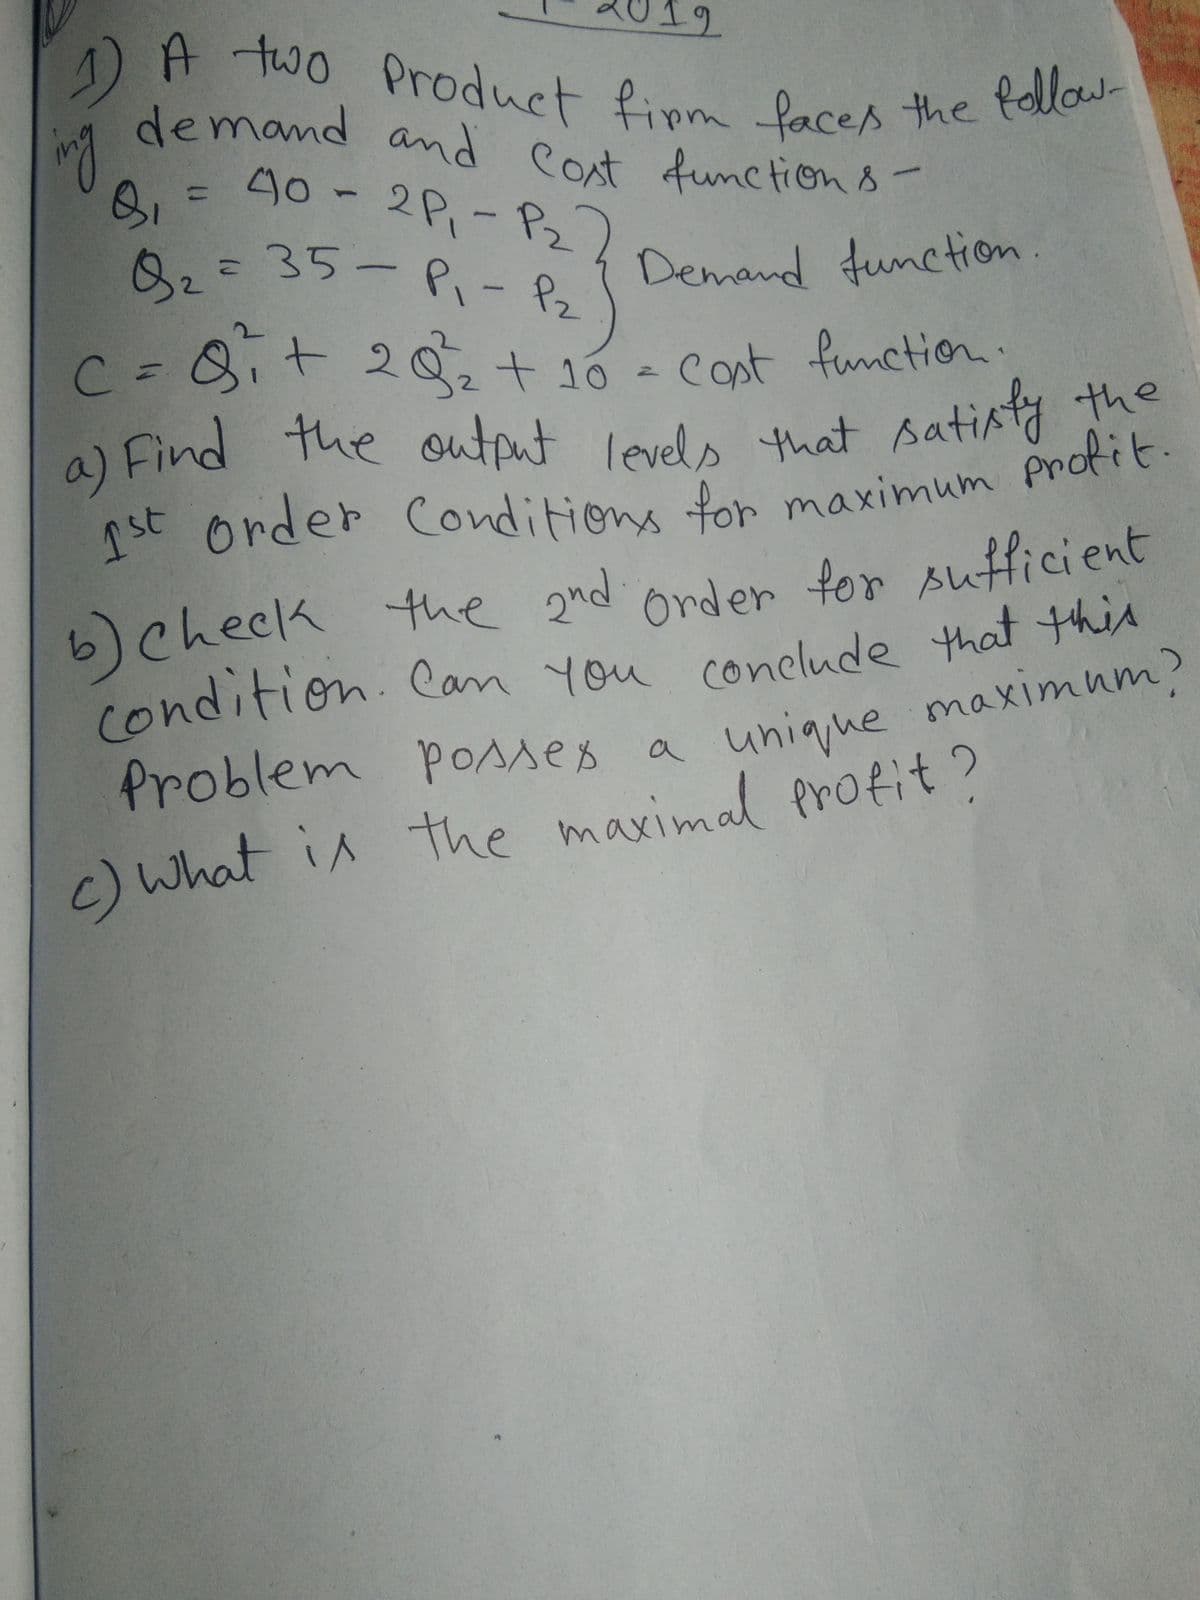 )A two Product finm faces the follow-
= 40-2P1
demand and Cost function 8-
a) Find the output levels that satiaty the
12
demand amd
40-2P,-P2
タ,=35-P、- 8
follow-
ng
Cont function8
32
Demand function.
C%=8it 20+ 10
cost function.
a) Find the output levels that sati.
order Conditions
ythe
tor maximum profit.
6)check the 2nd
(ondition. Can you conclude that this
Problem Posses a
Order for sufficient
unique maximum)
c)What in the maximal profit?
